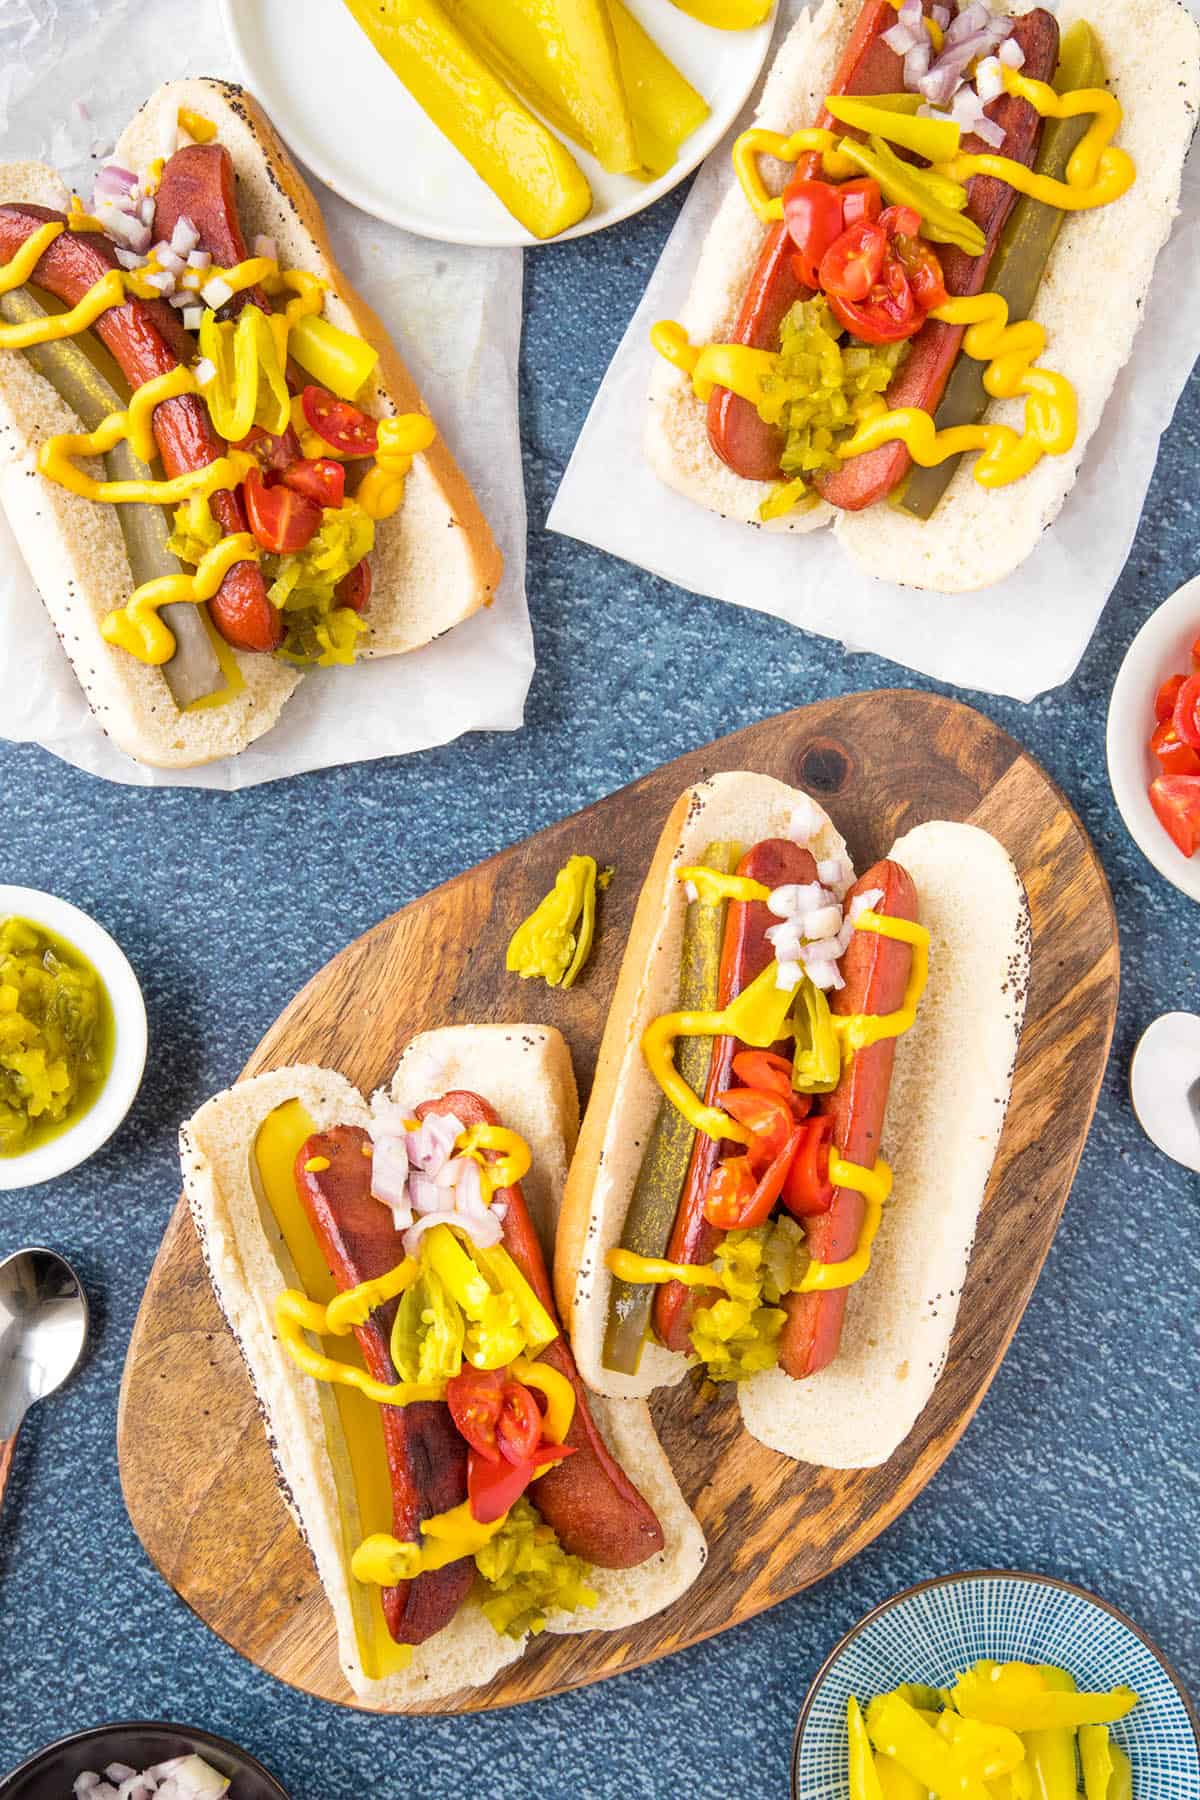 Chicago Style Hot Dogs, ready to eat